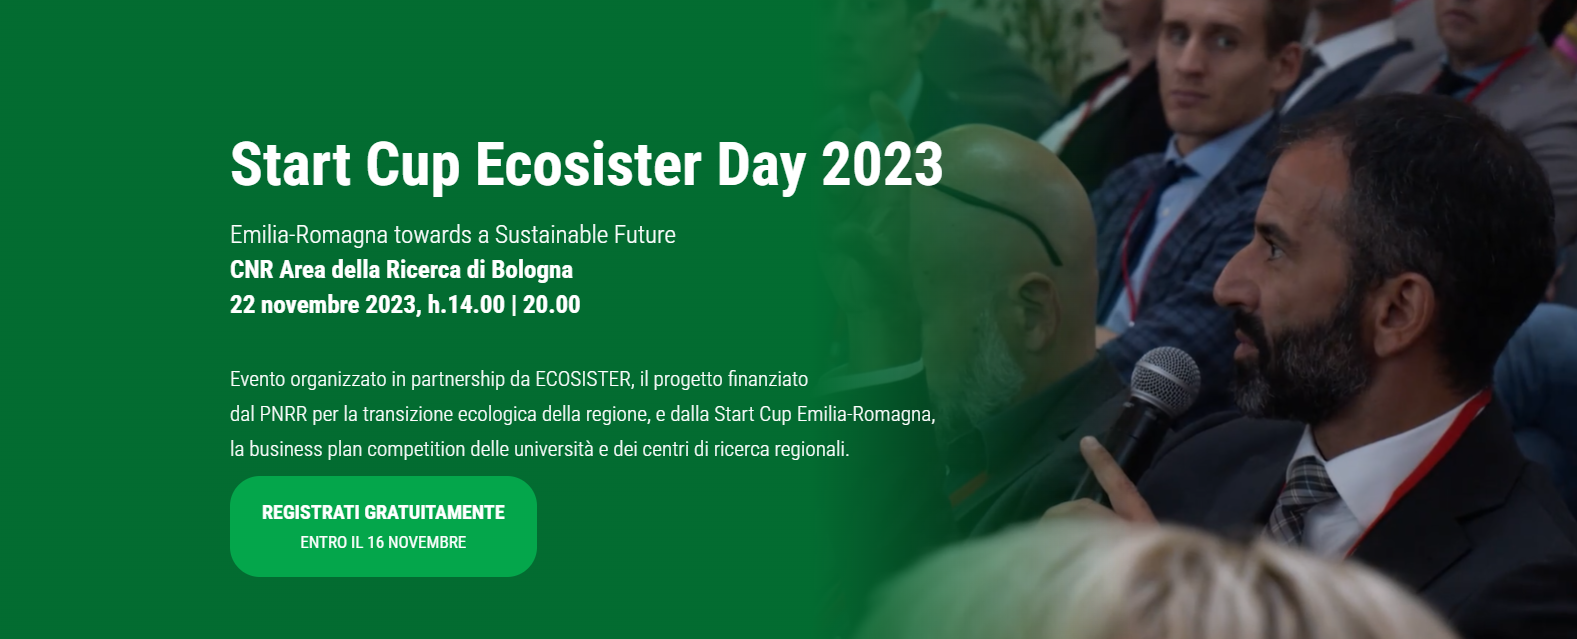 Start Cup Ecosister Day | Emilia-Romagna towards a Sustainable Future